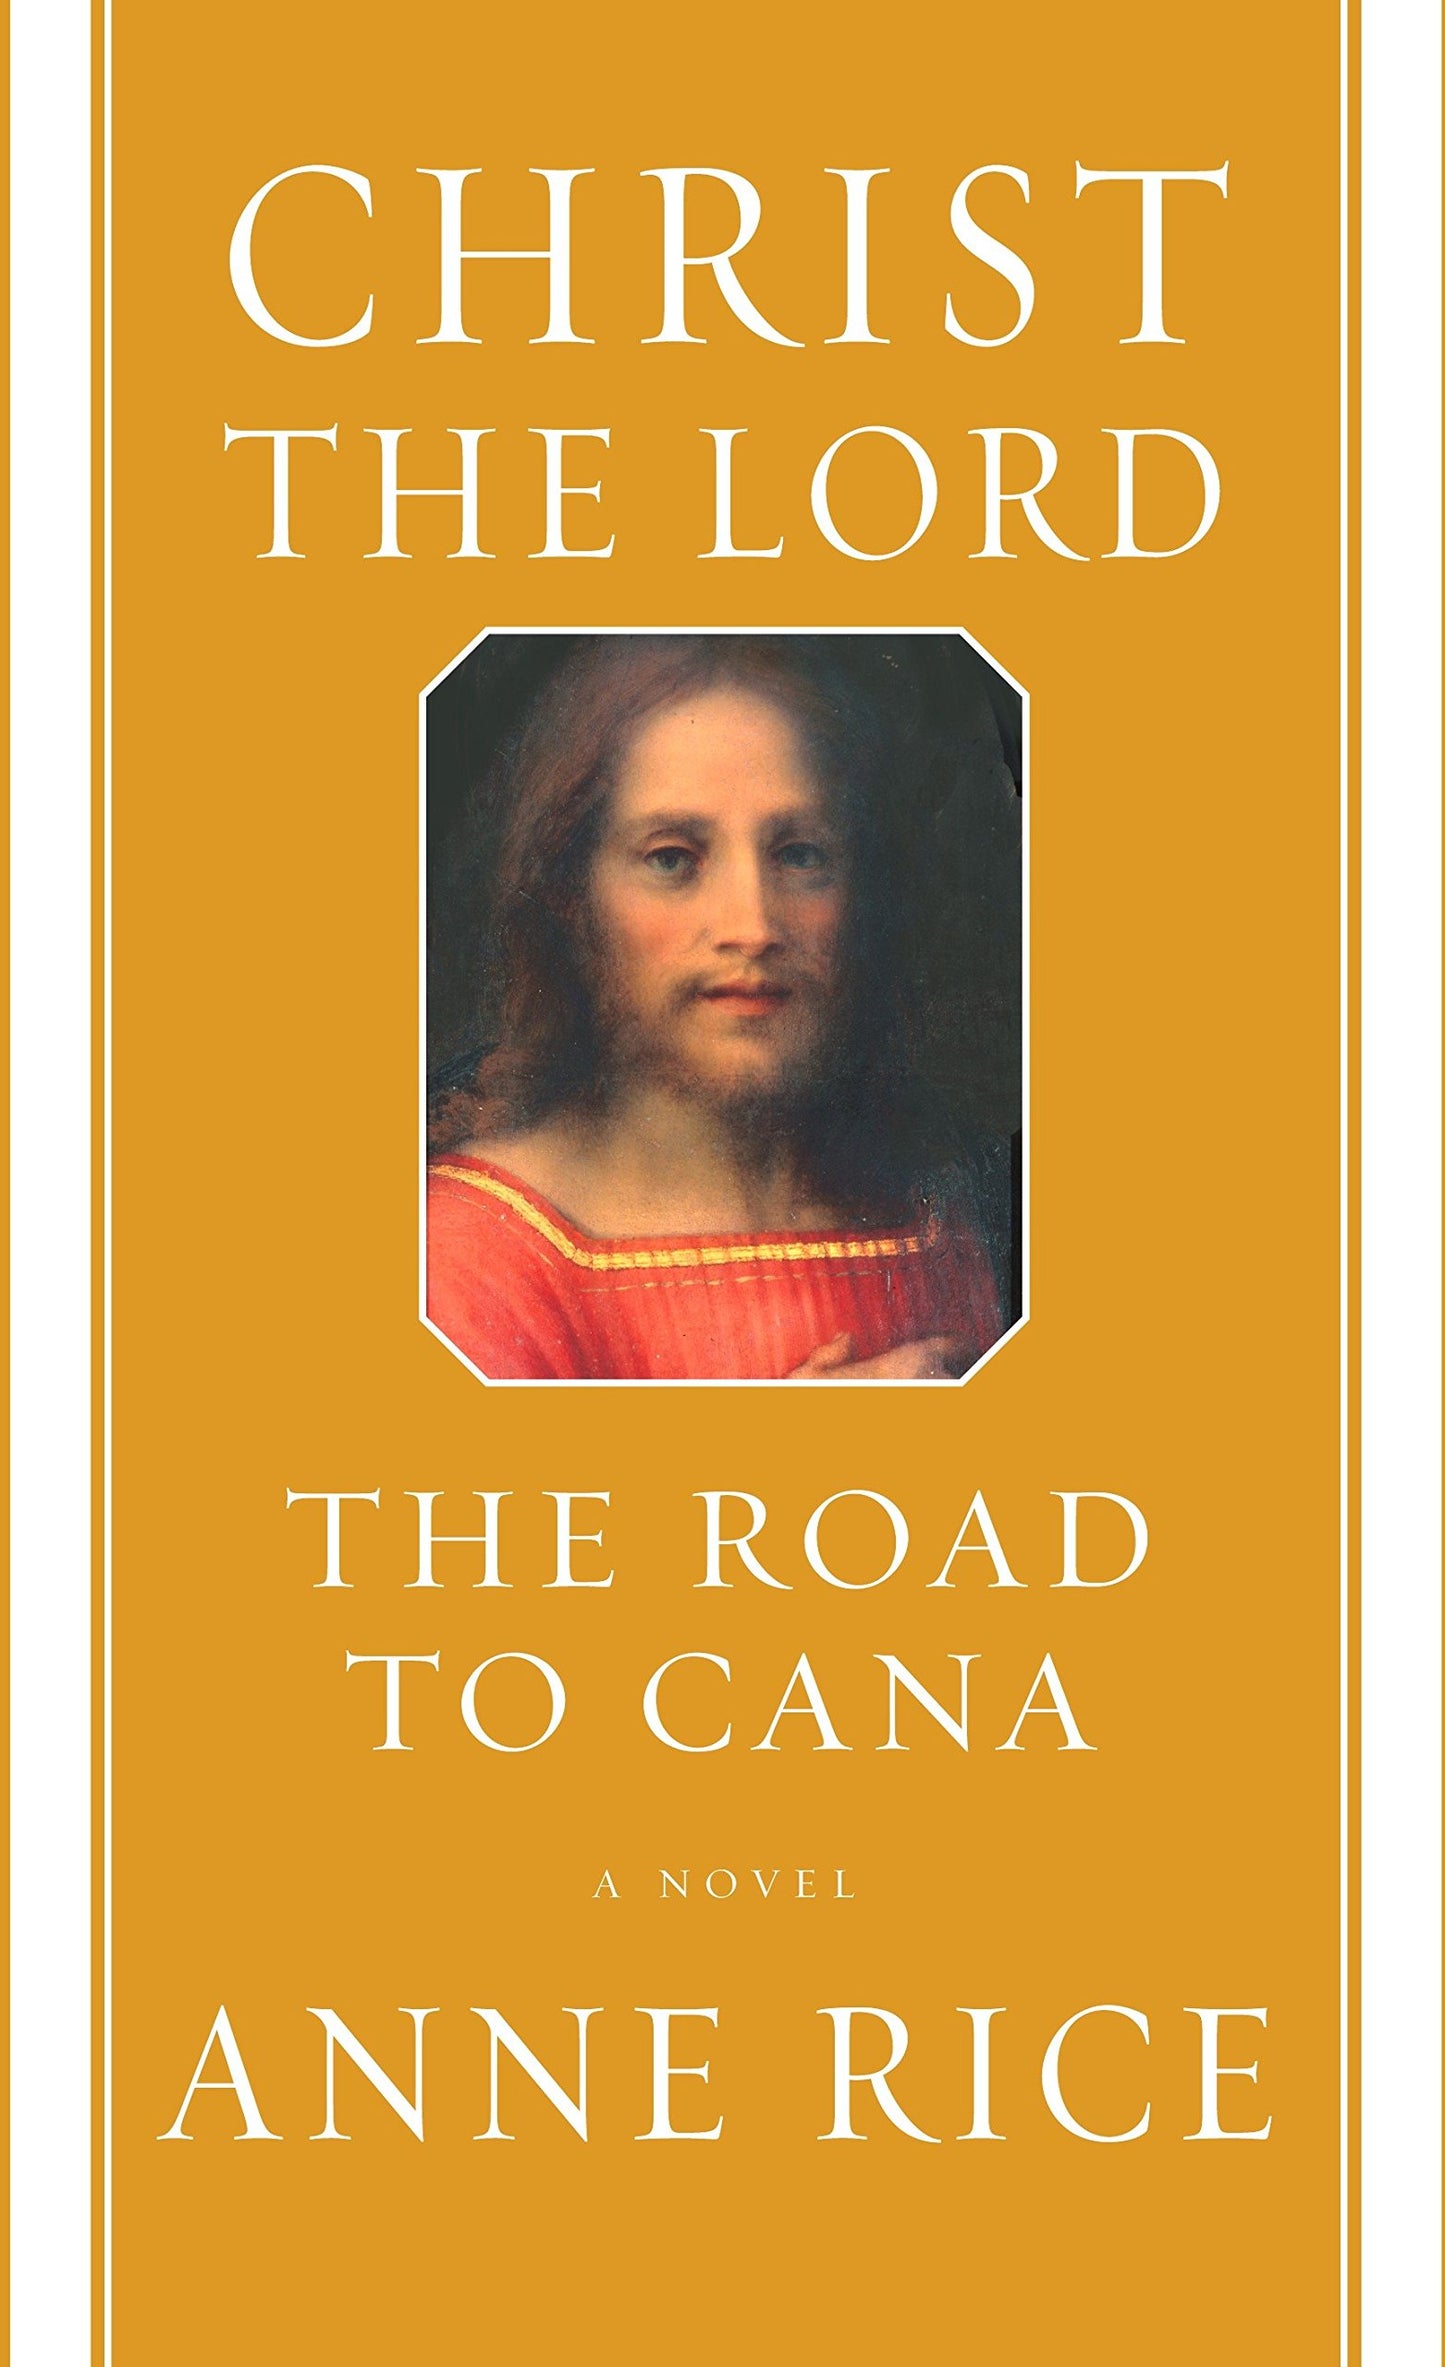 The Road to Cana - A Novel : Christ the Lord, Book 2 of 2 (Hardcover) Anne Rice